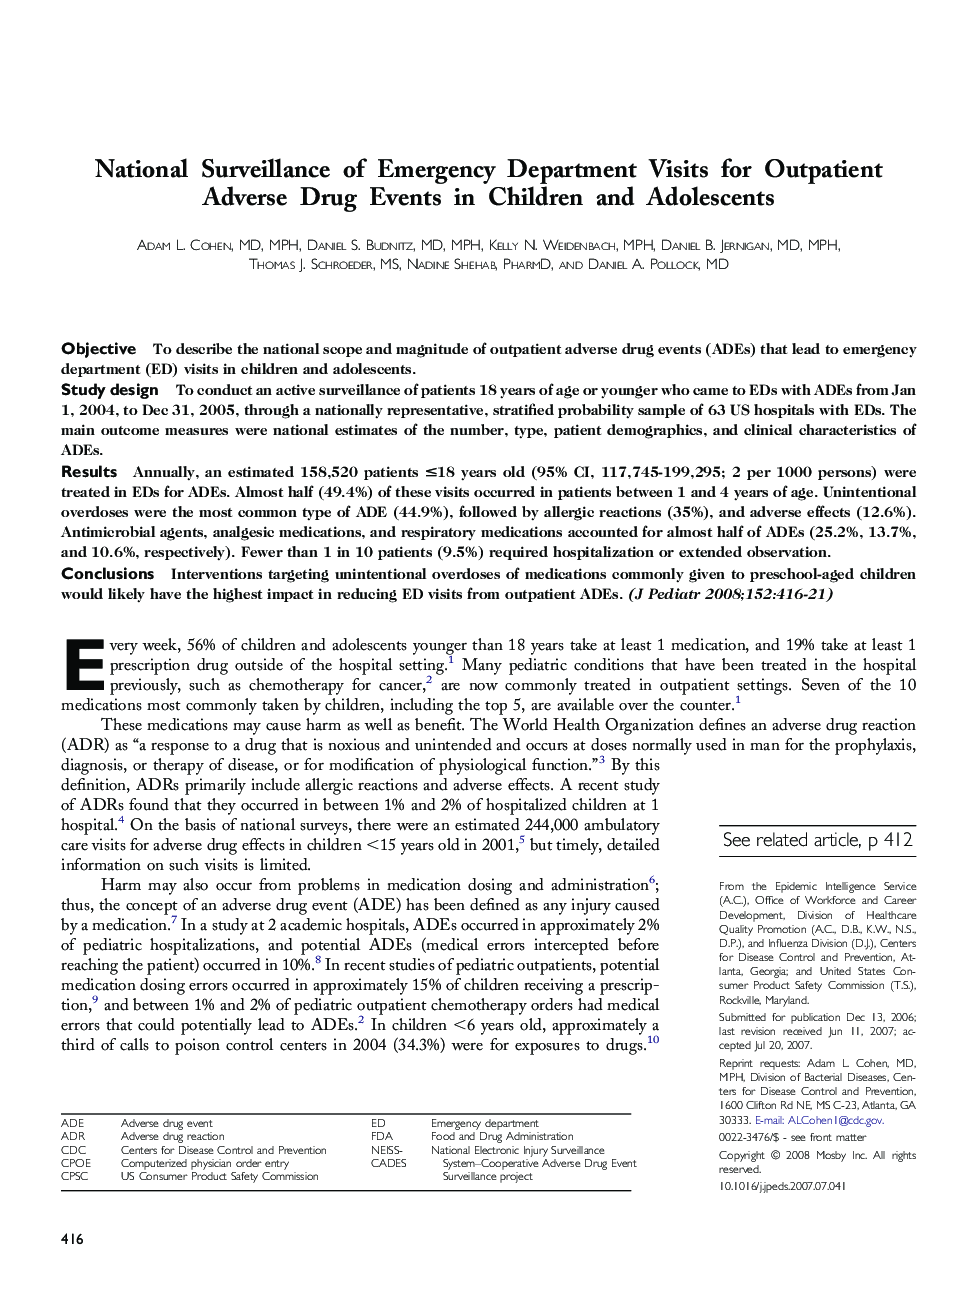 National Surveillance of Emergency Department Visits for Outpatient Adverse Drug Events in Children and Adolescents